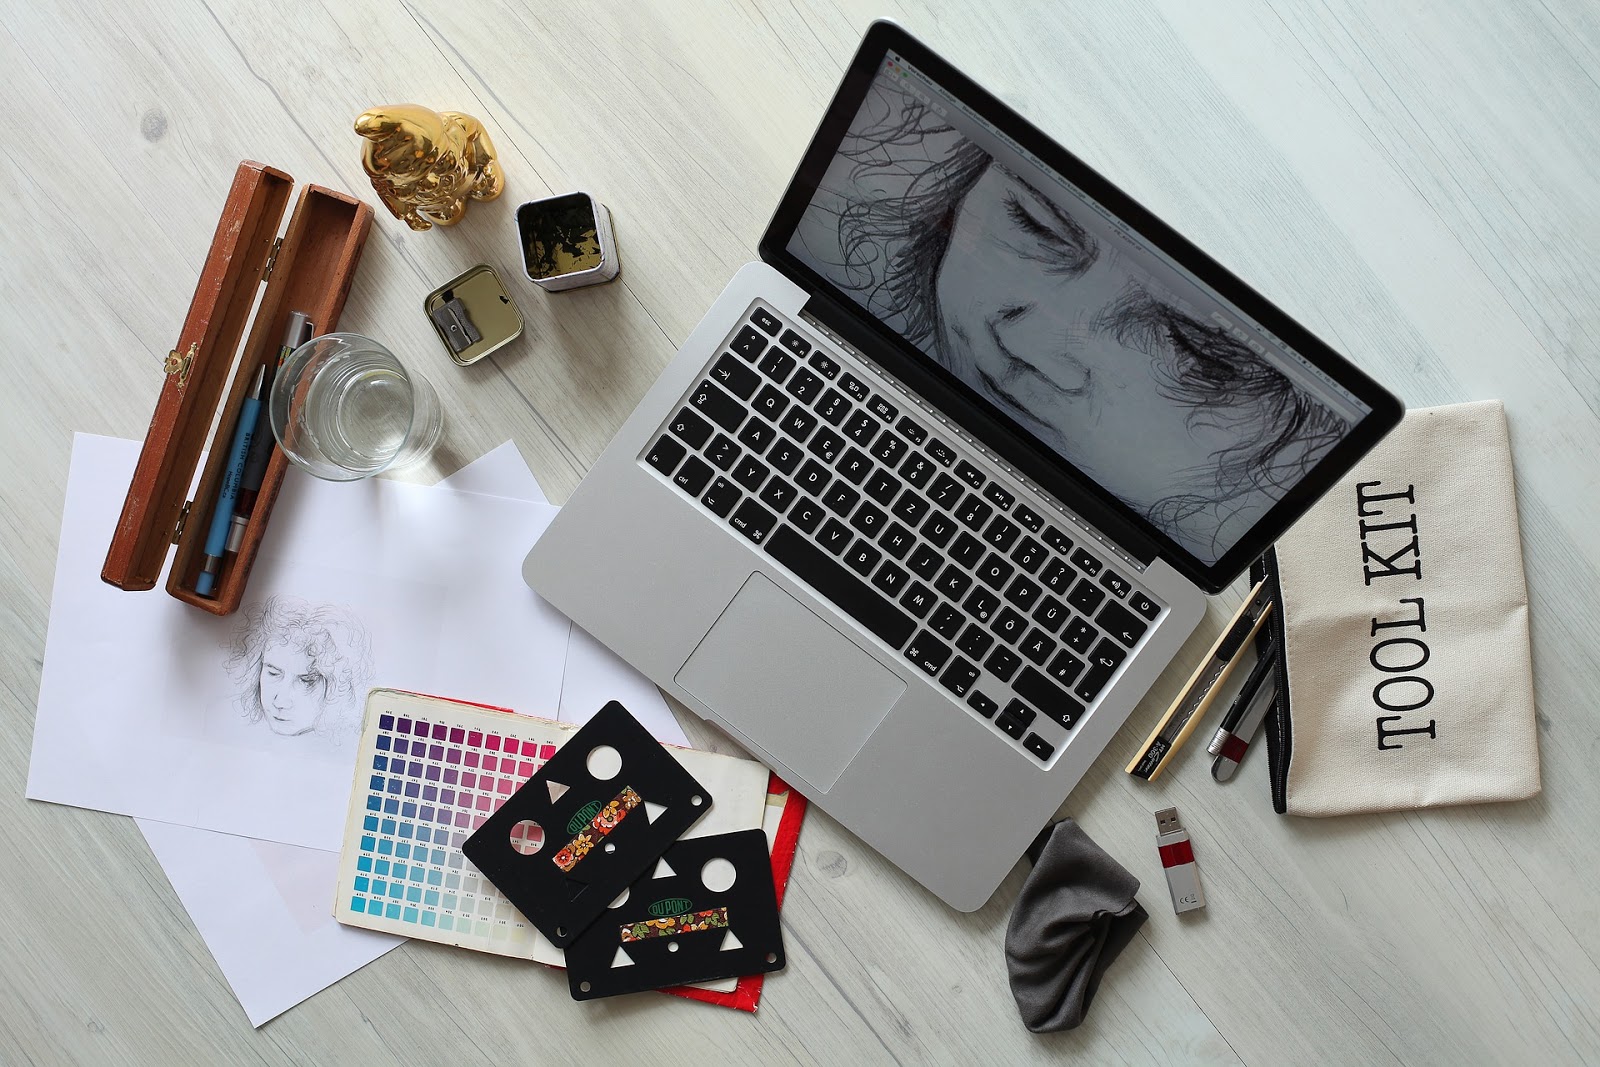 Your Guide to Making Money as a Graphic Designer